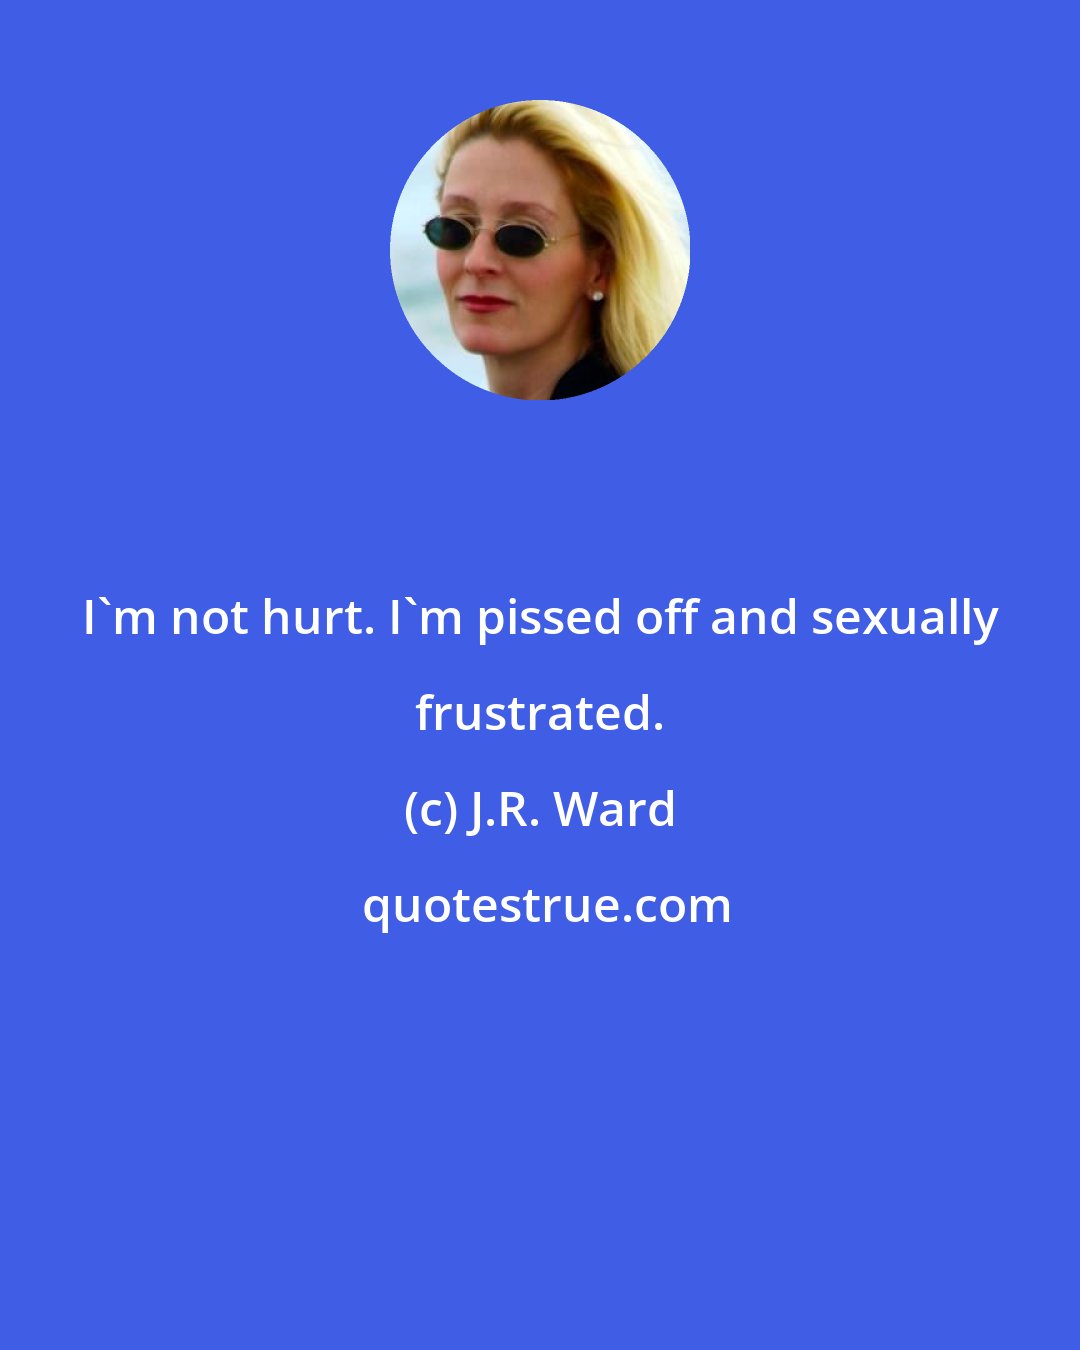 J.R. Ward: I'm not hurt. I'm pissed off and sexually frustrated.